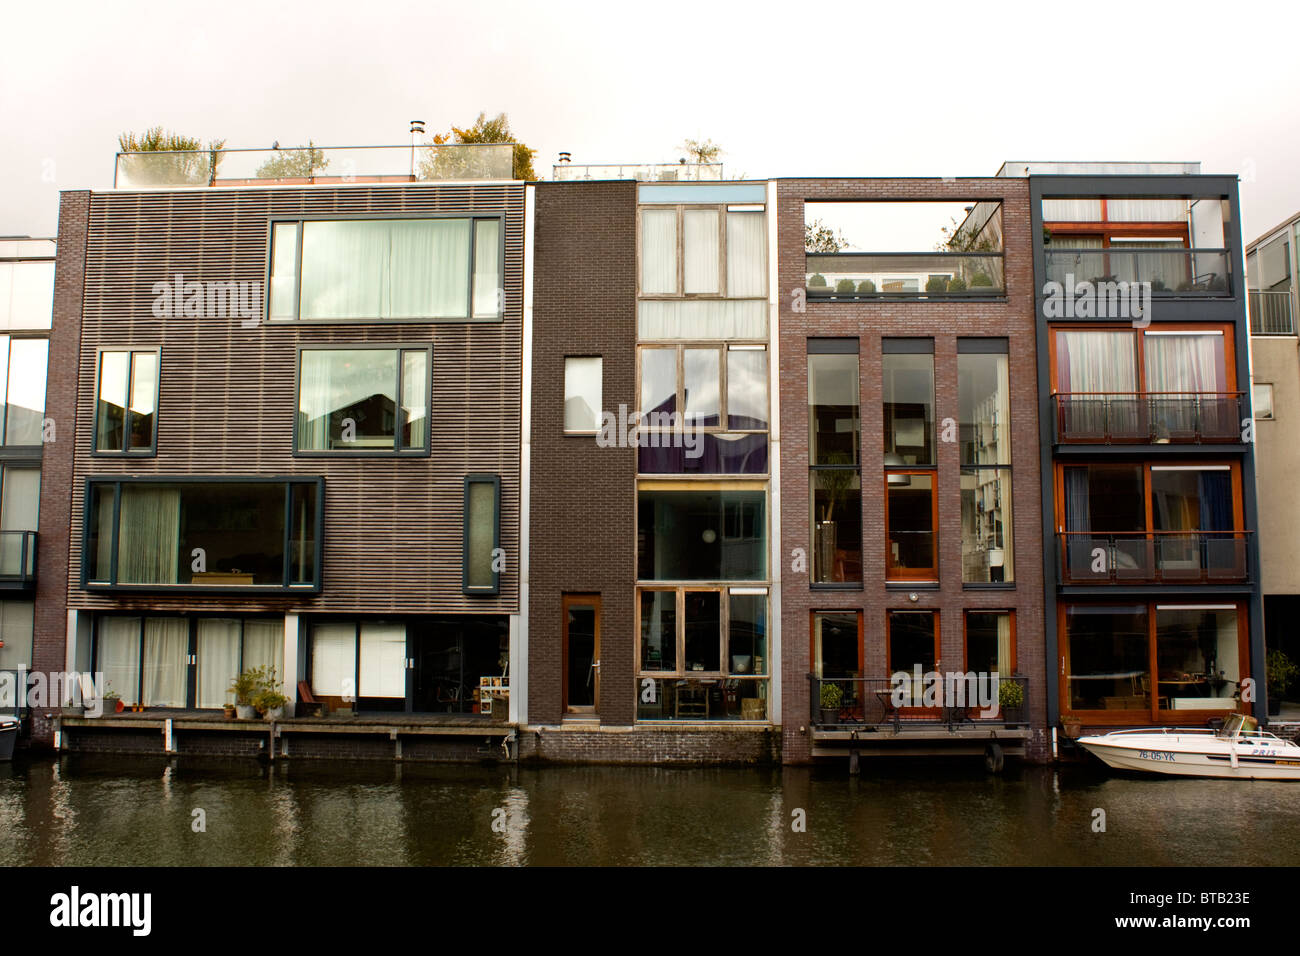 Unique architecture in in Scheepstimmermanstraat, Amsterdam. Row houses  with all different modern facades Stock Photo - Alamy